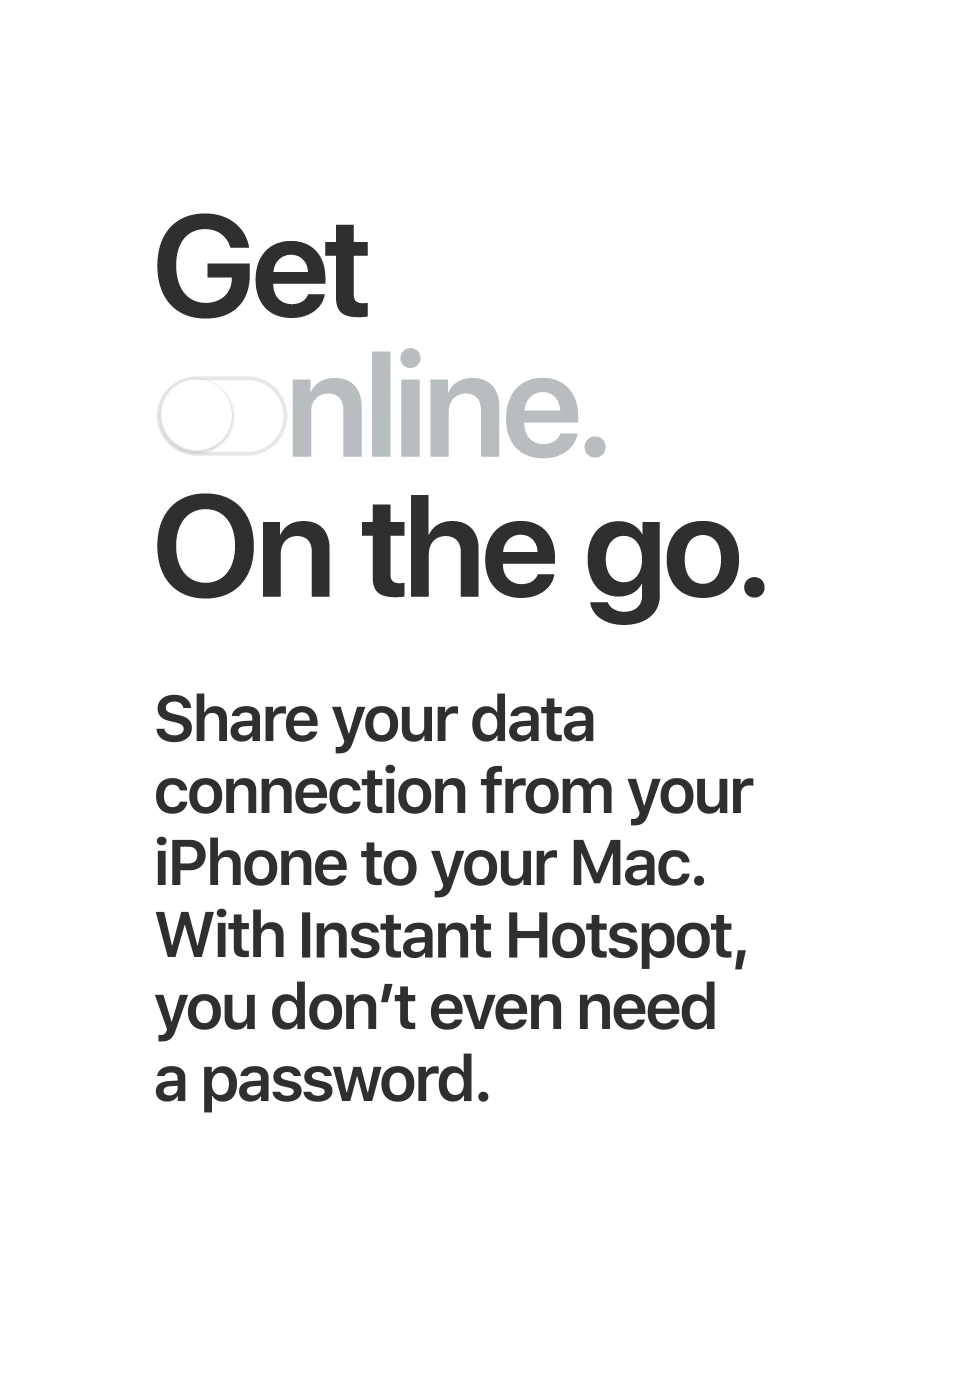 Get online. On the go. Share your data connection from your iPhone to your Mac. With Instant Hotspot, you don't even need a password.